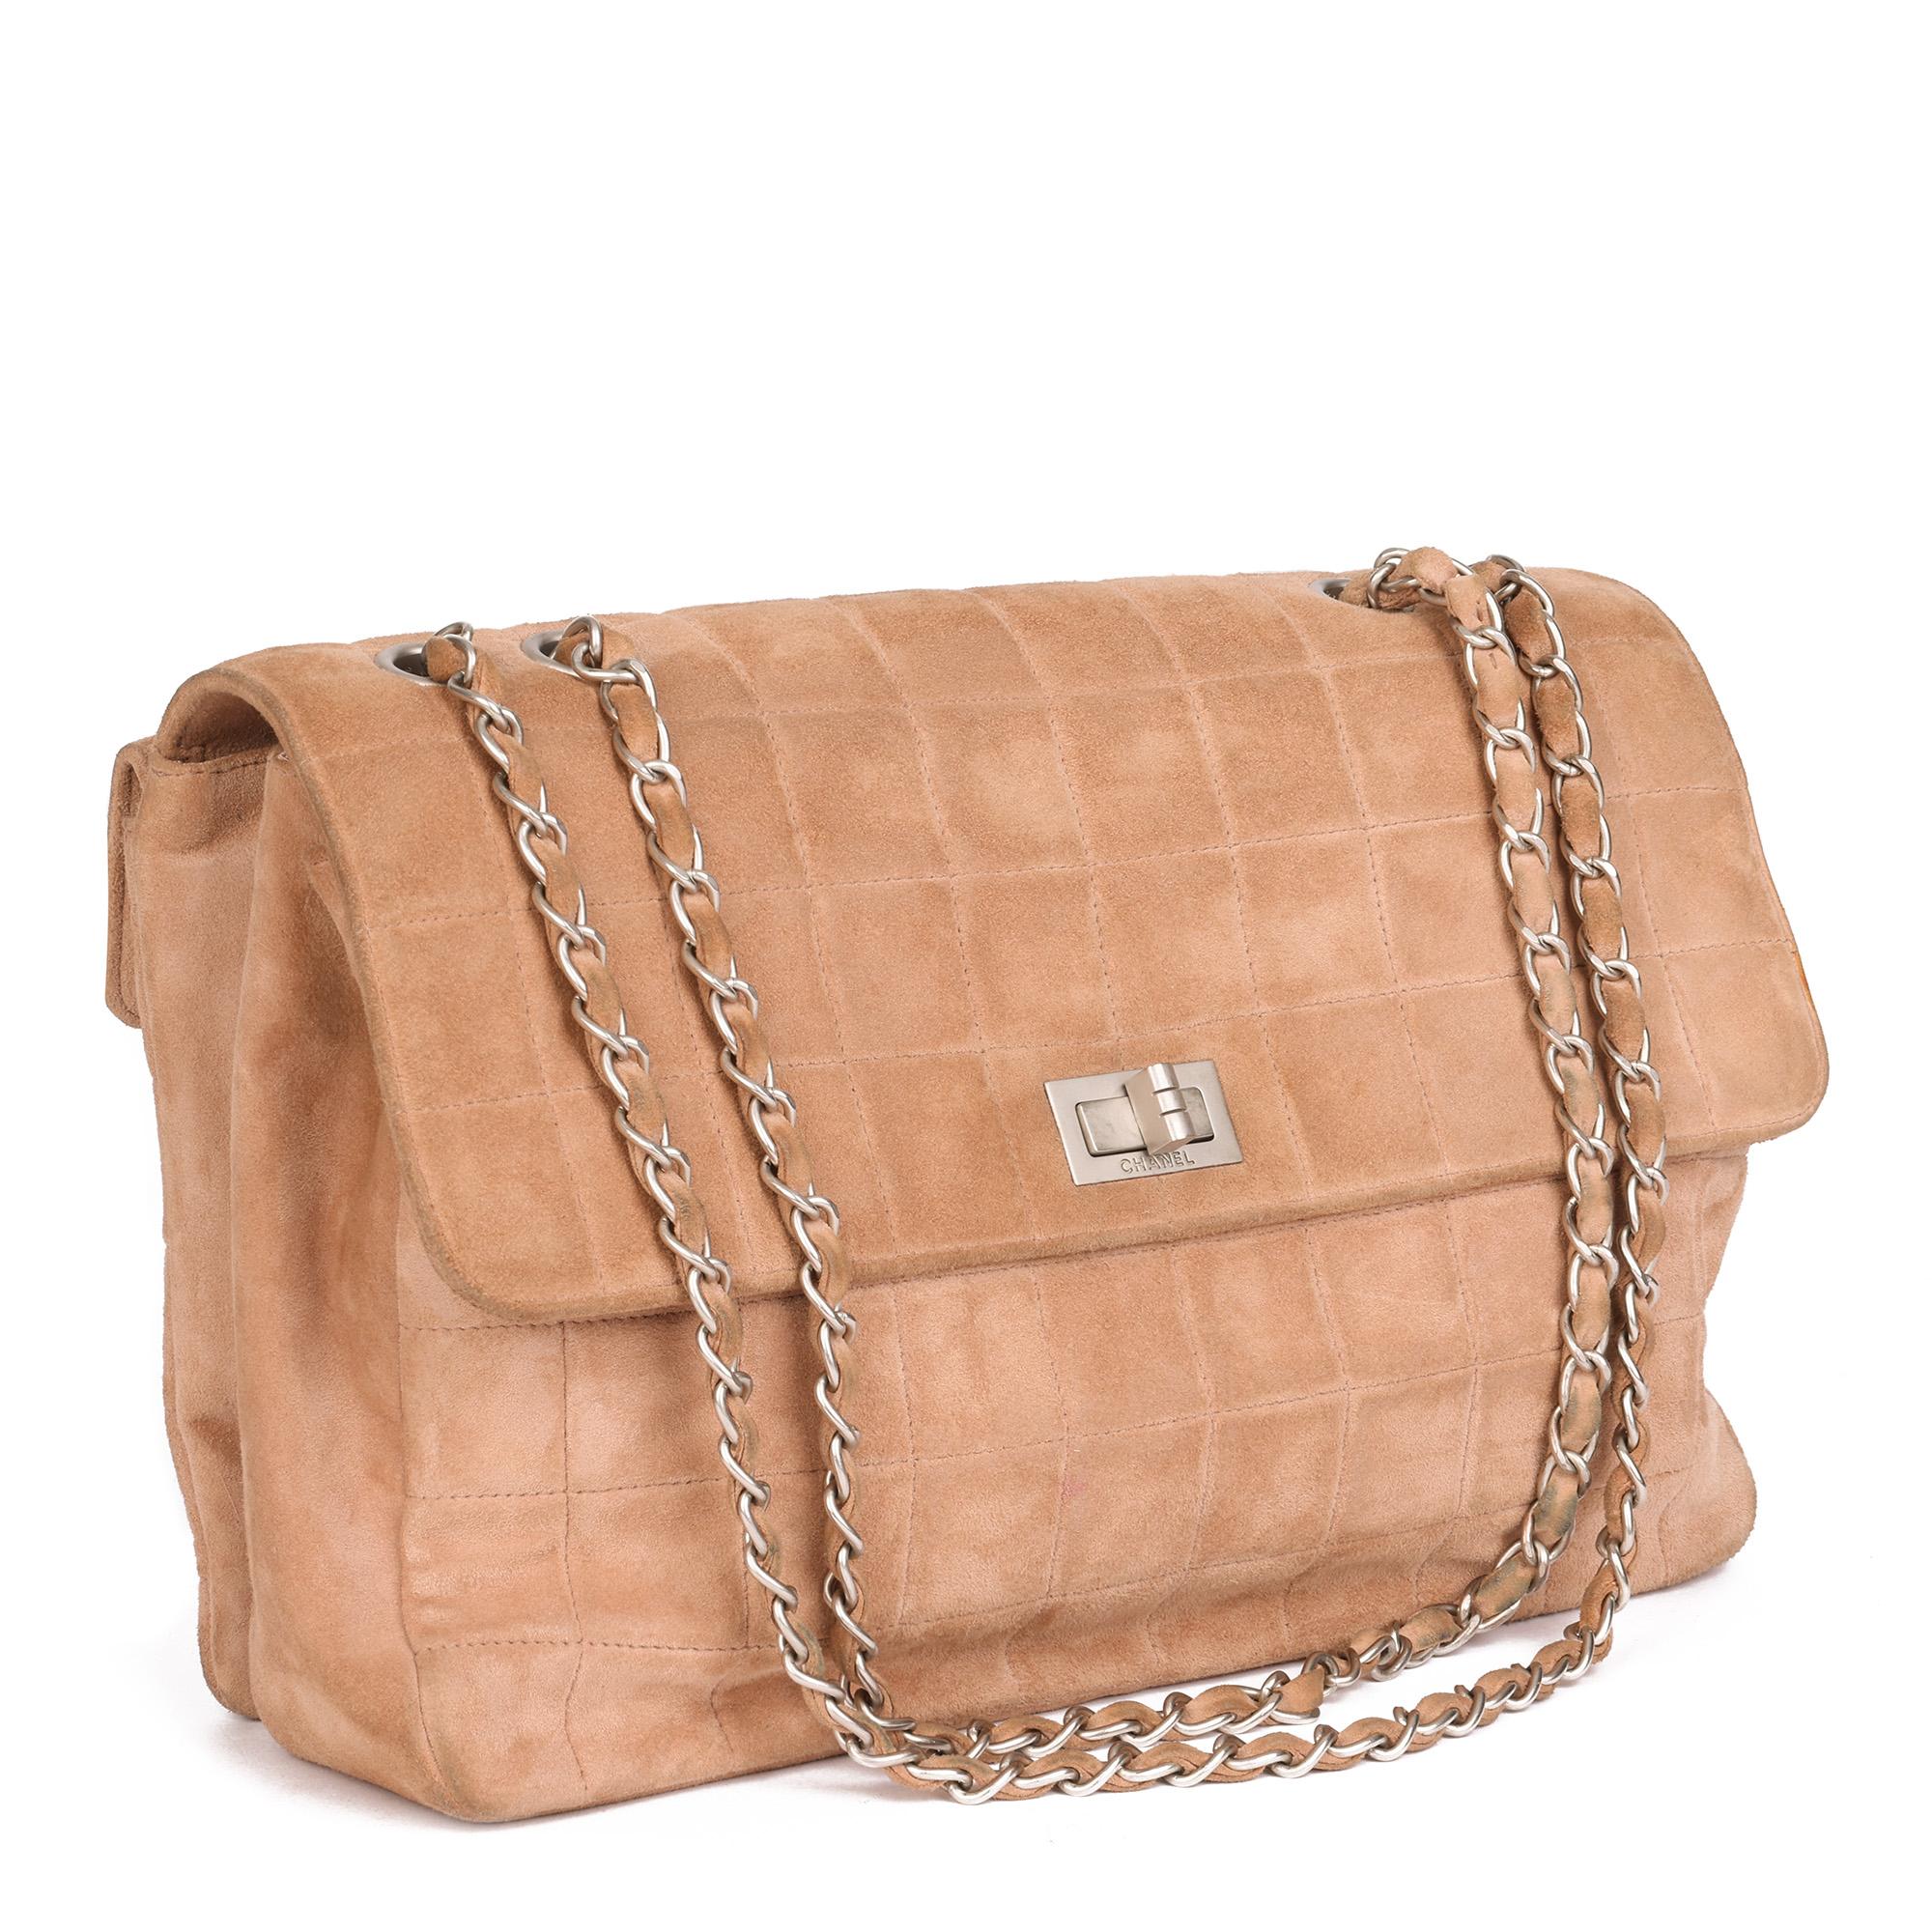 CHANEL
Beige Chocolate Bar Quilted Suede Vintage Jumbo 2.55 Reissue Flap Bag

Xupes Reference: CWAHF-HB001
Serial Number: 5900449
Age (Circa): 2000
Accompanied By: Chanel Box
Authenticity Details: Serial Sticker (Made in France)
Gender: Ladies
Type: